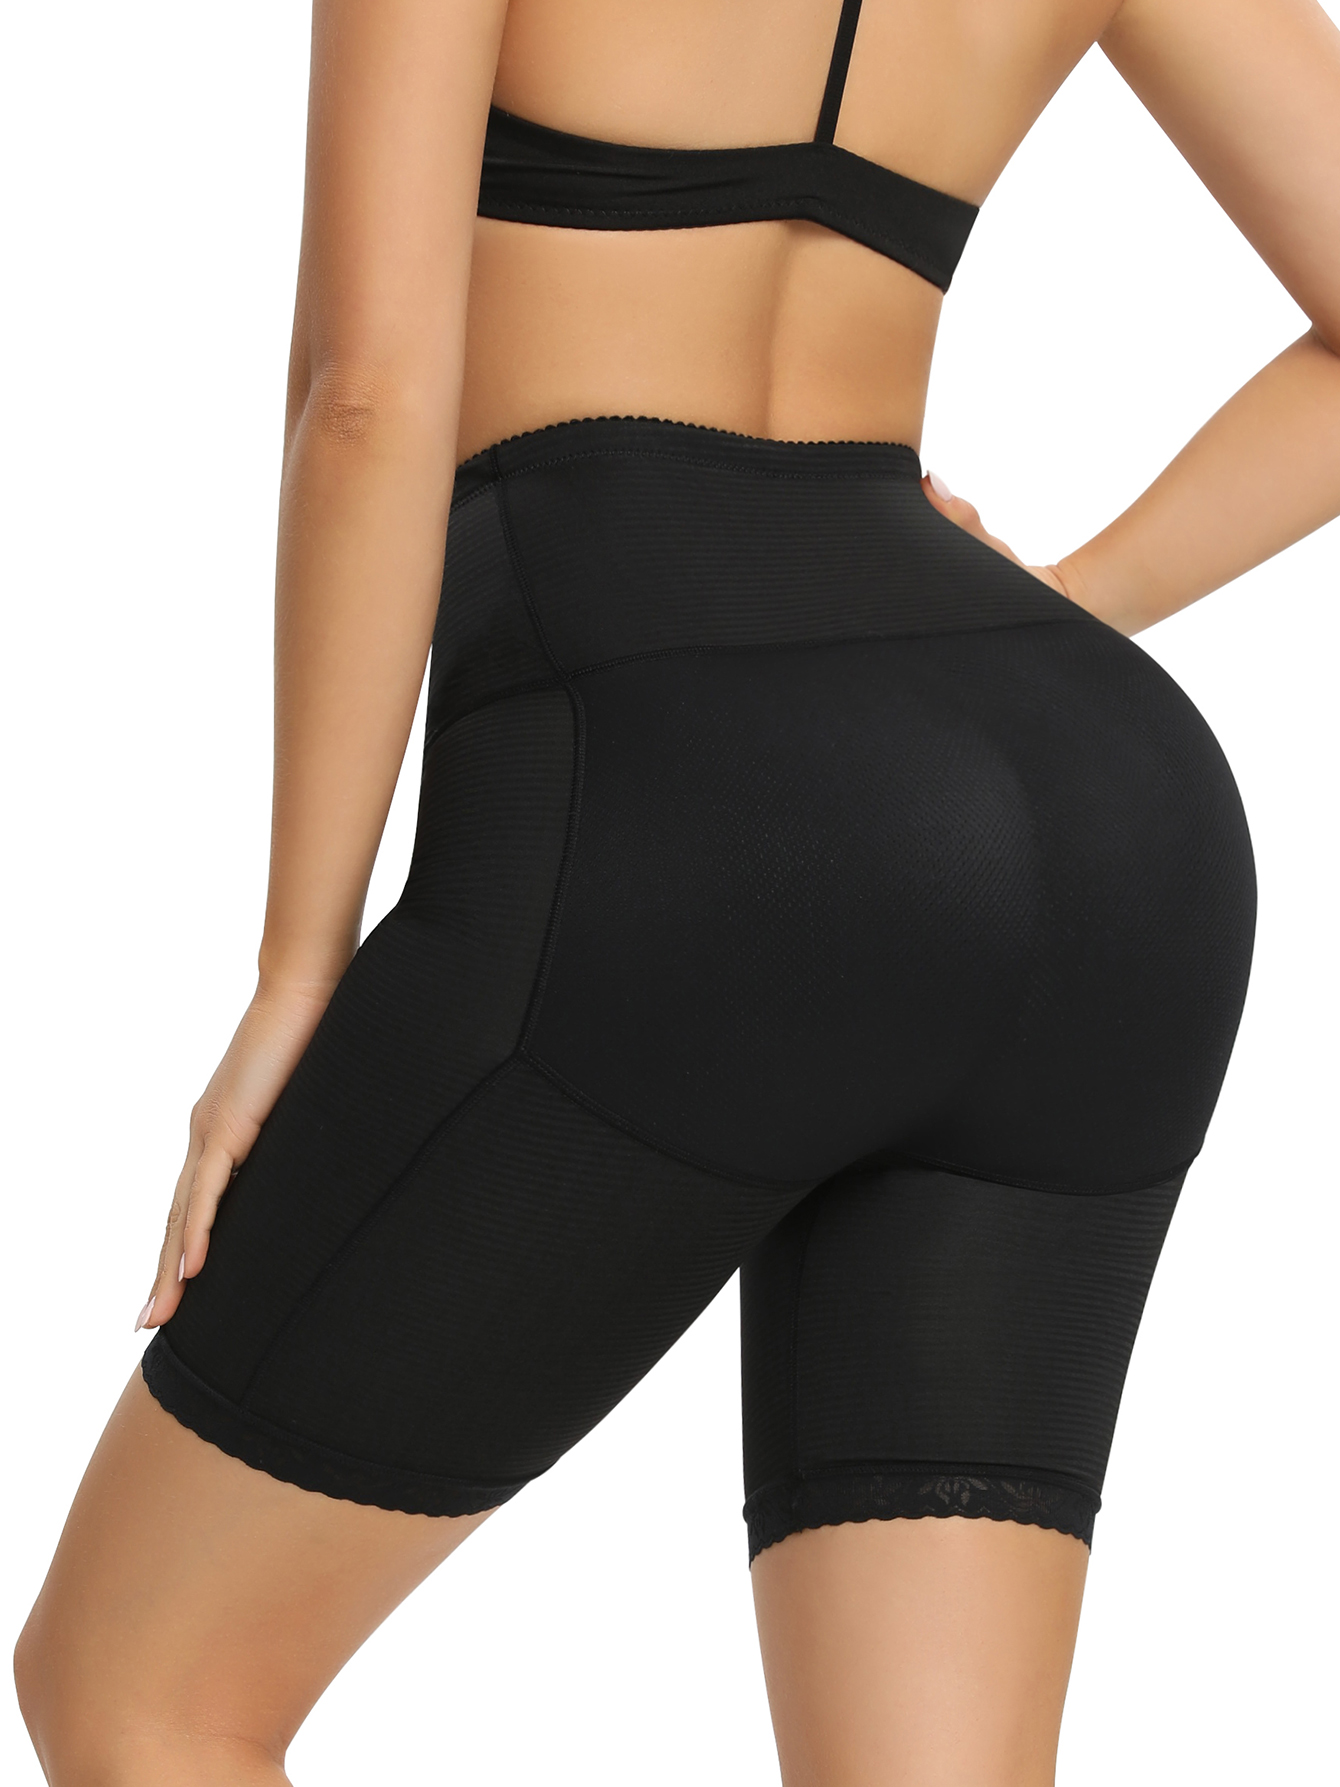 Lilvigor Butt Lifting Shapewear for Women Girl High Waisted Control Panties  Compression Booty Lifting Shorts with Hook Zipper Closure Black